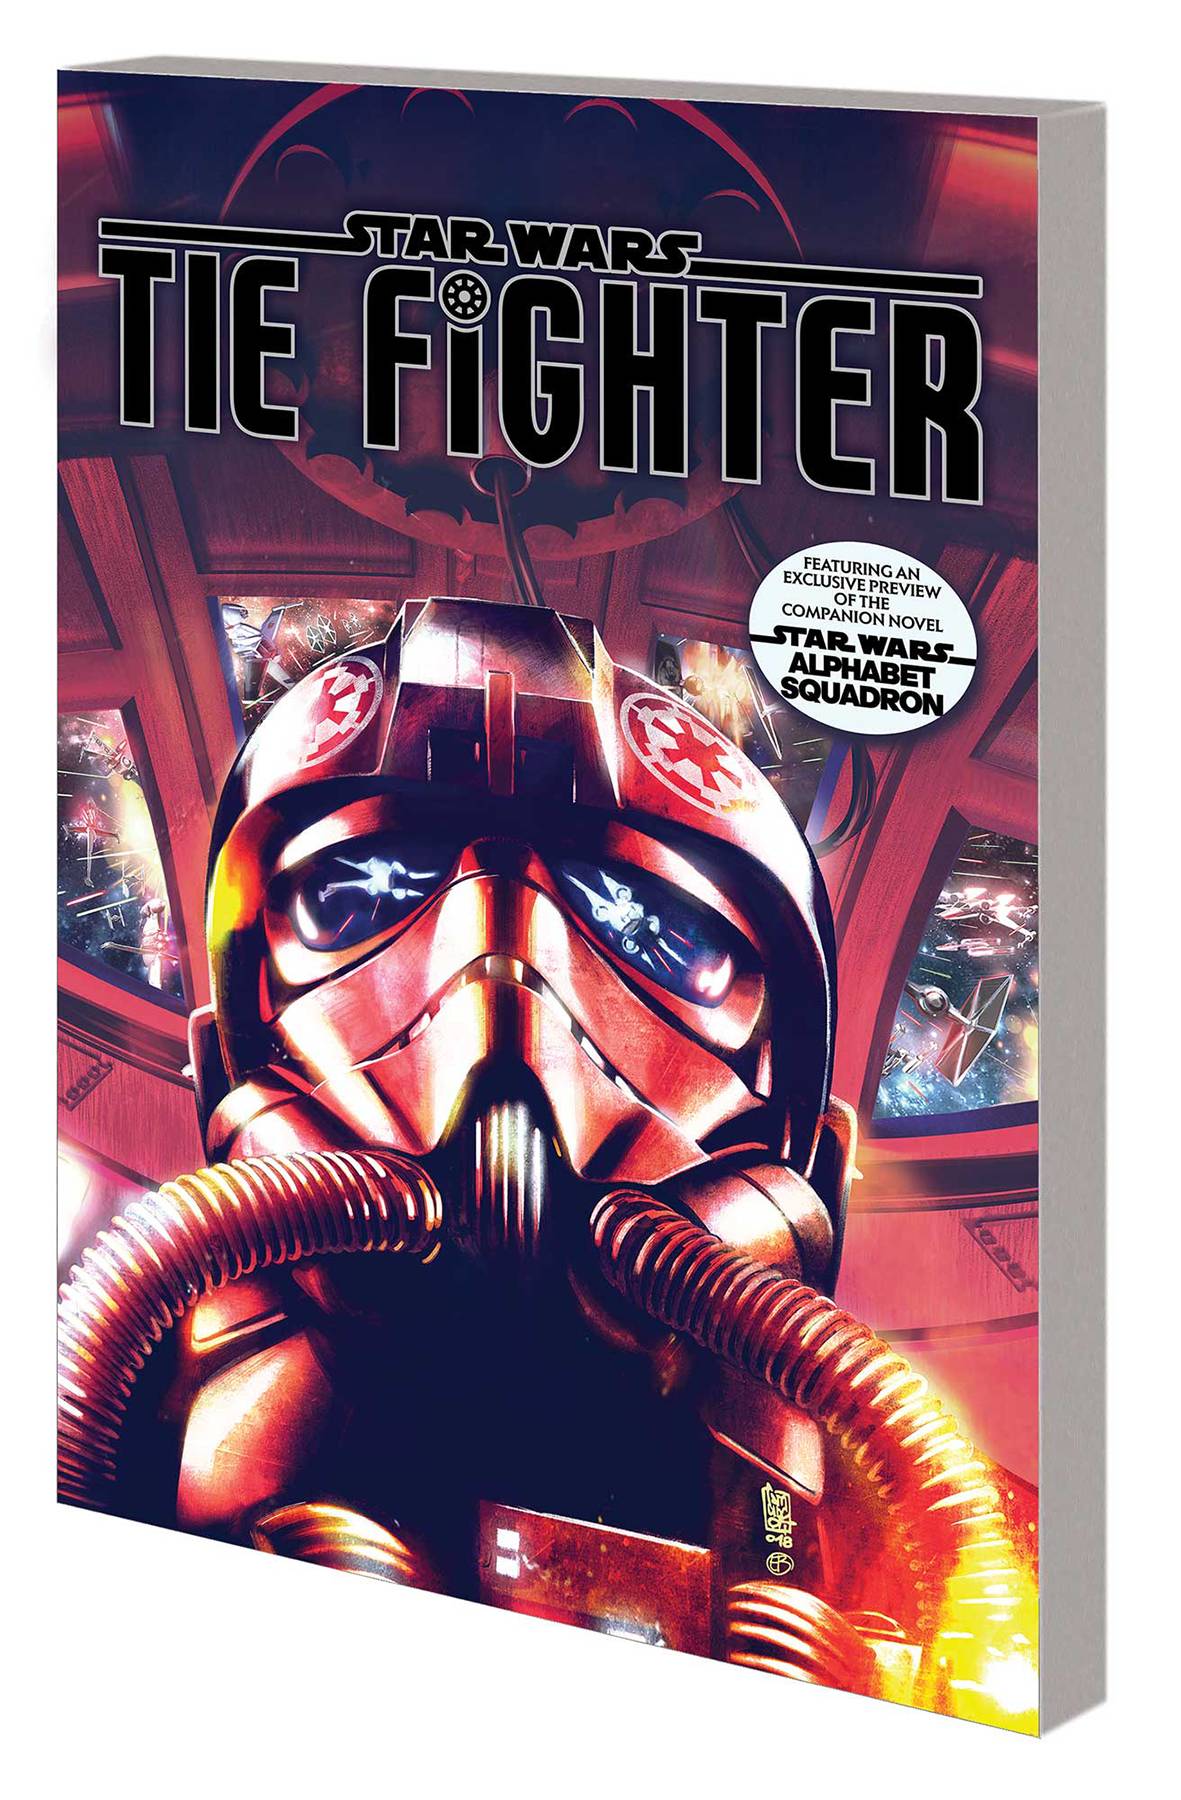 THE TIE-FIGHTER #1 STAR WARS GIUSEPPE CAMUNCOLI MAIN COVER MARVEL/2019 